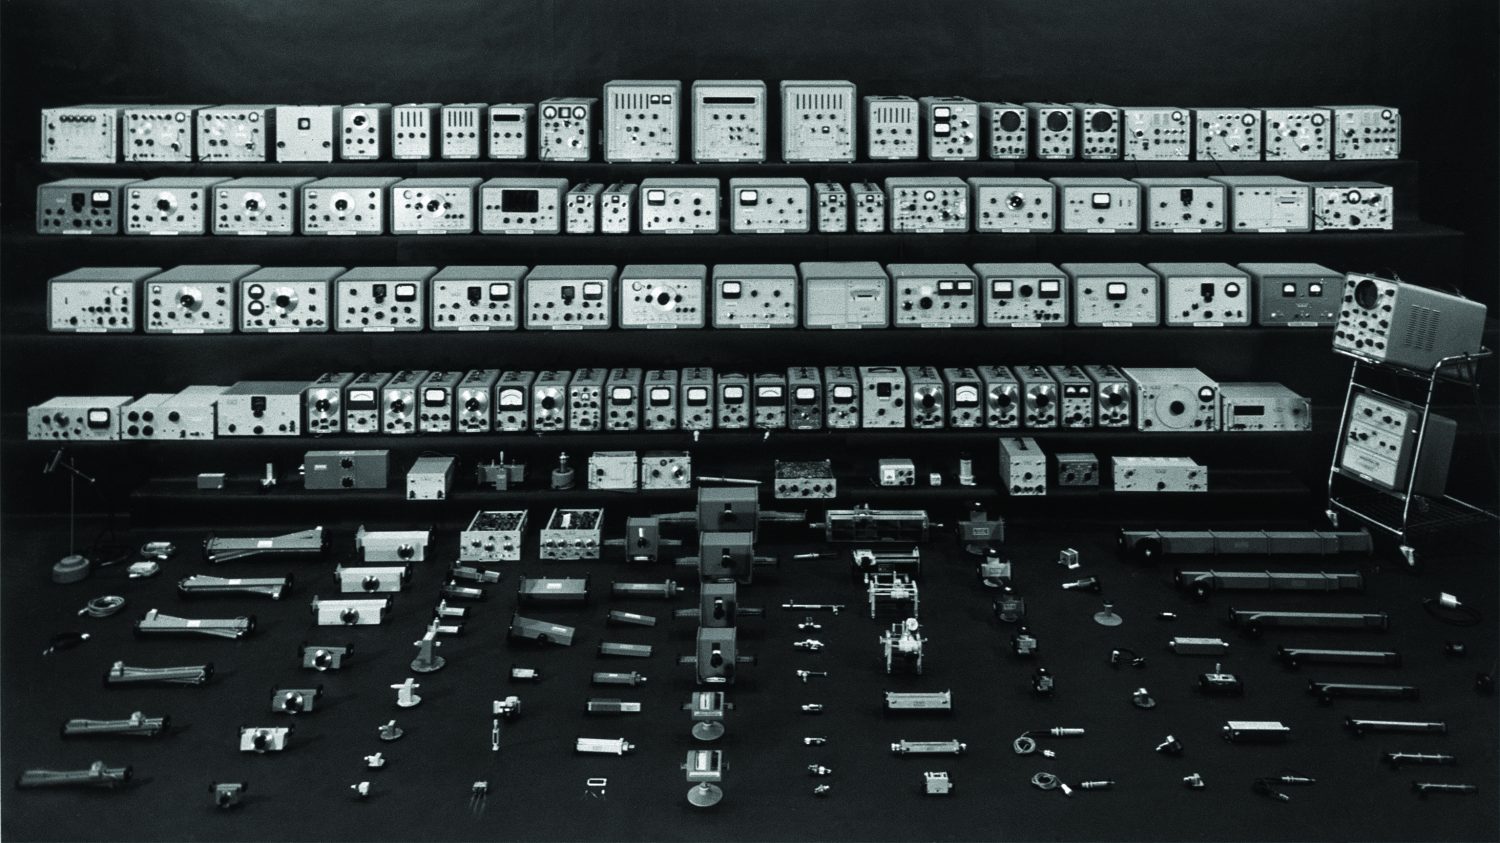 A photo of Hewlett-Packard's complete 1959 product line of 380 test and measurement instruments and accessories.